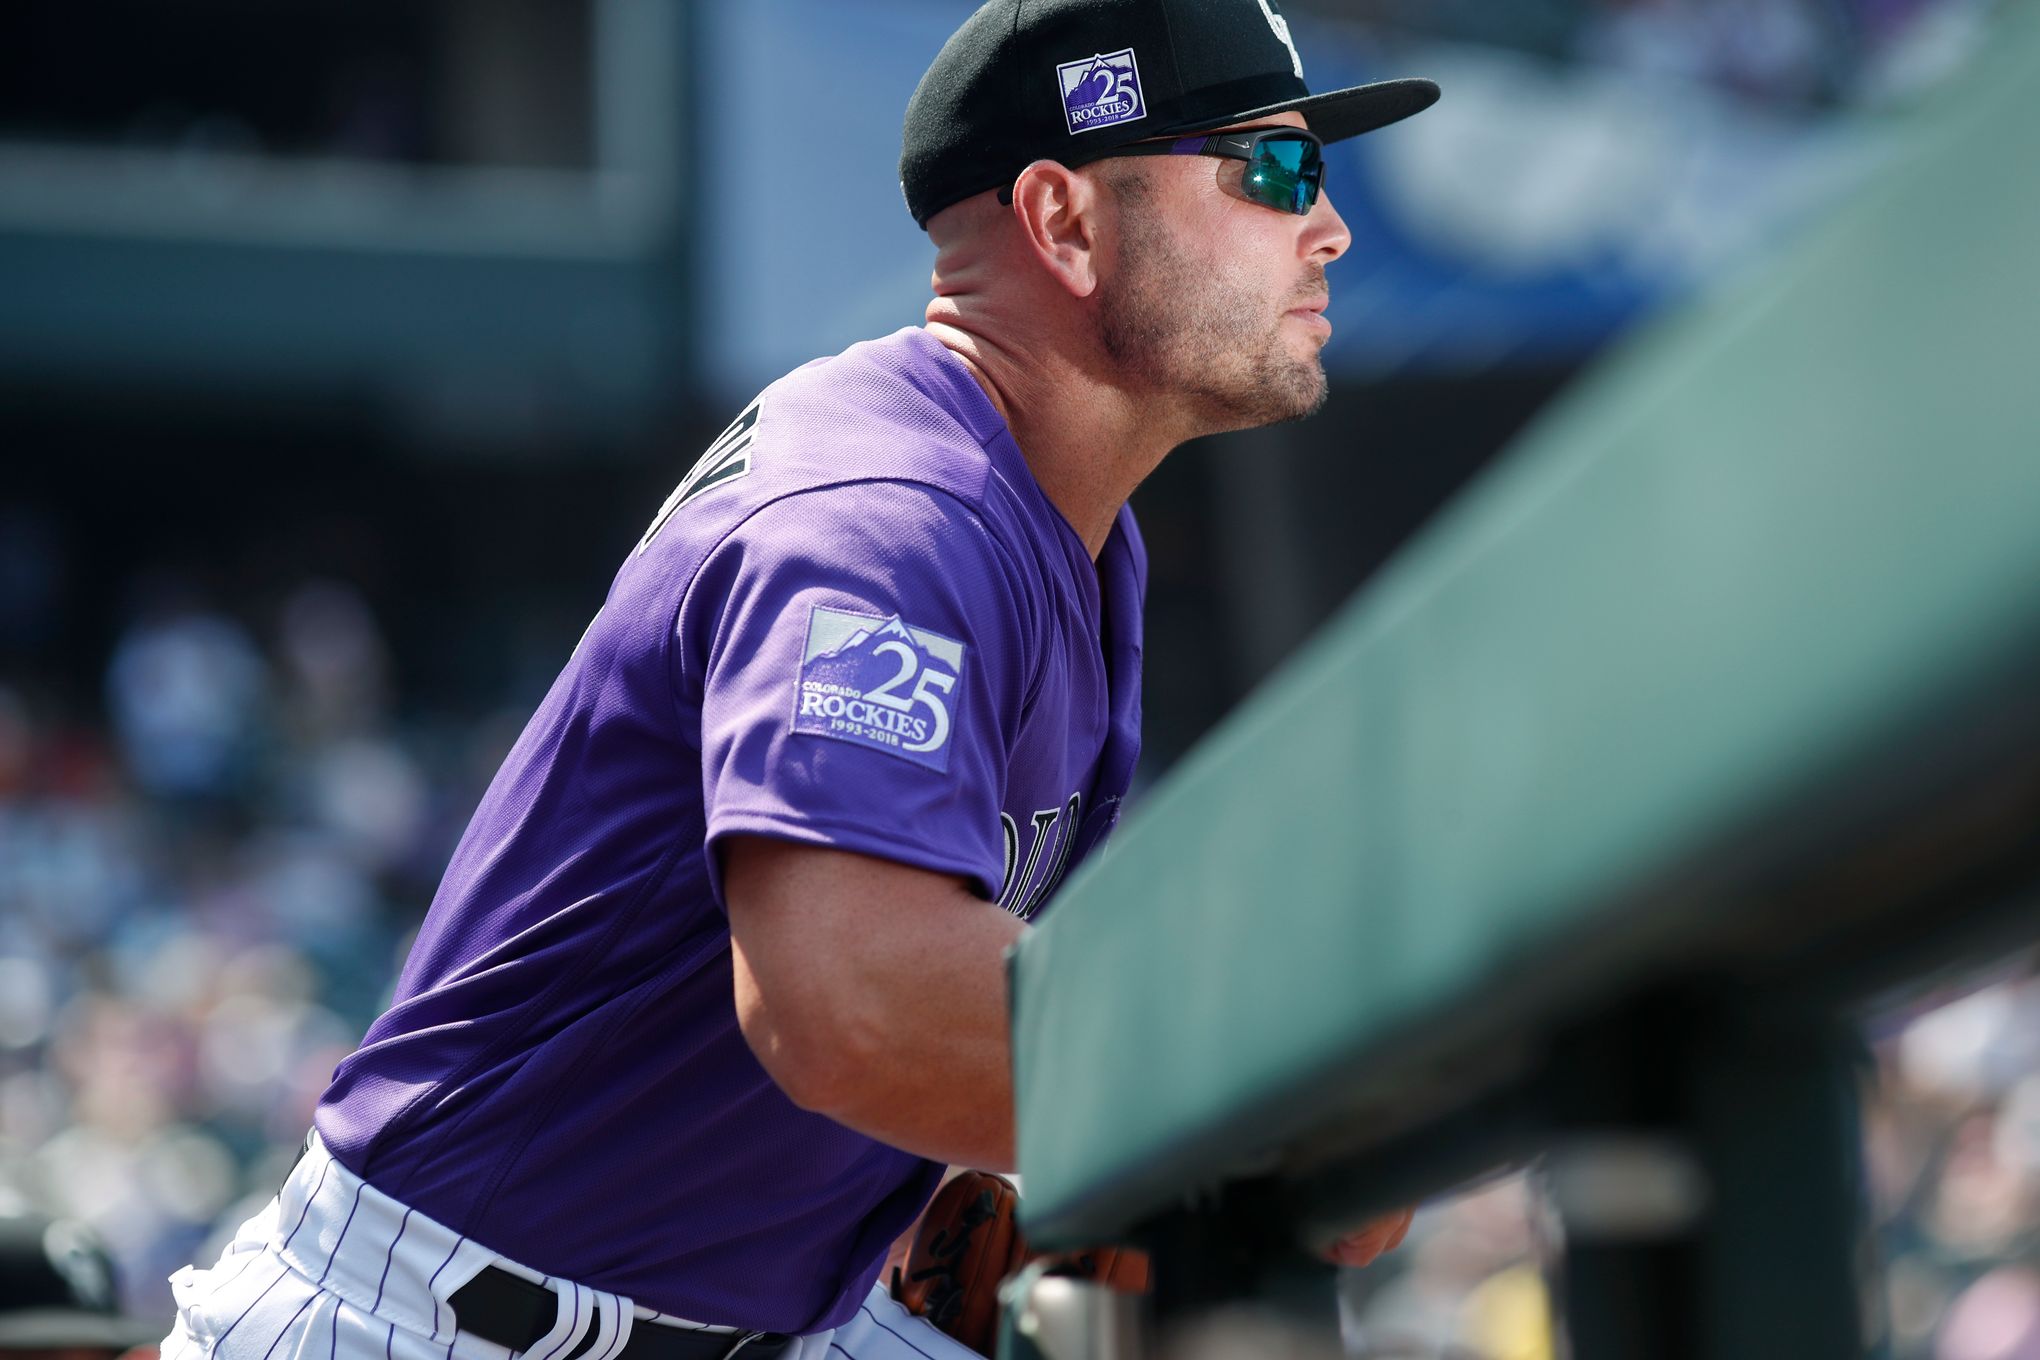 38-year-old outfielder Matt Holliday returns to the Rockies